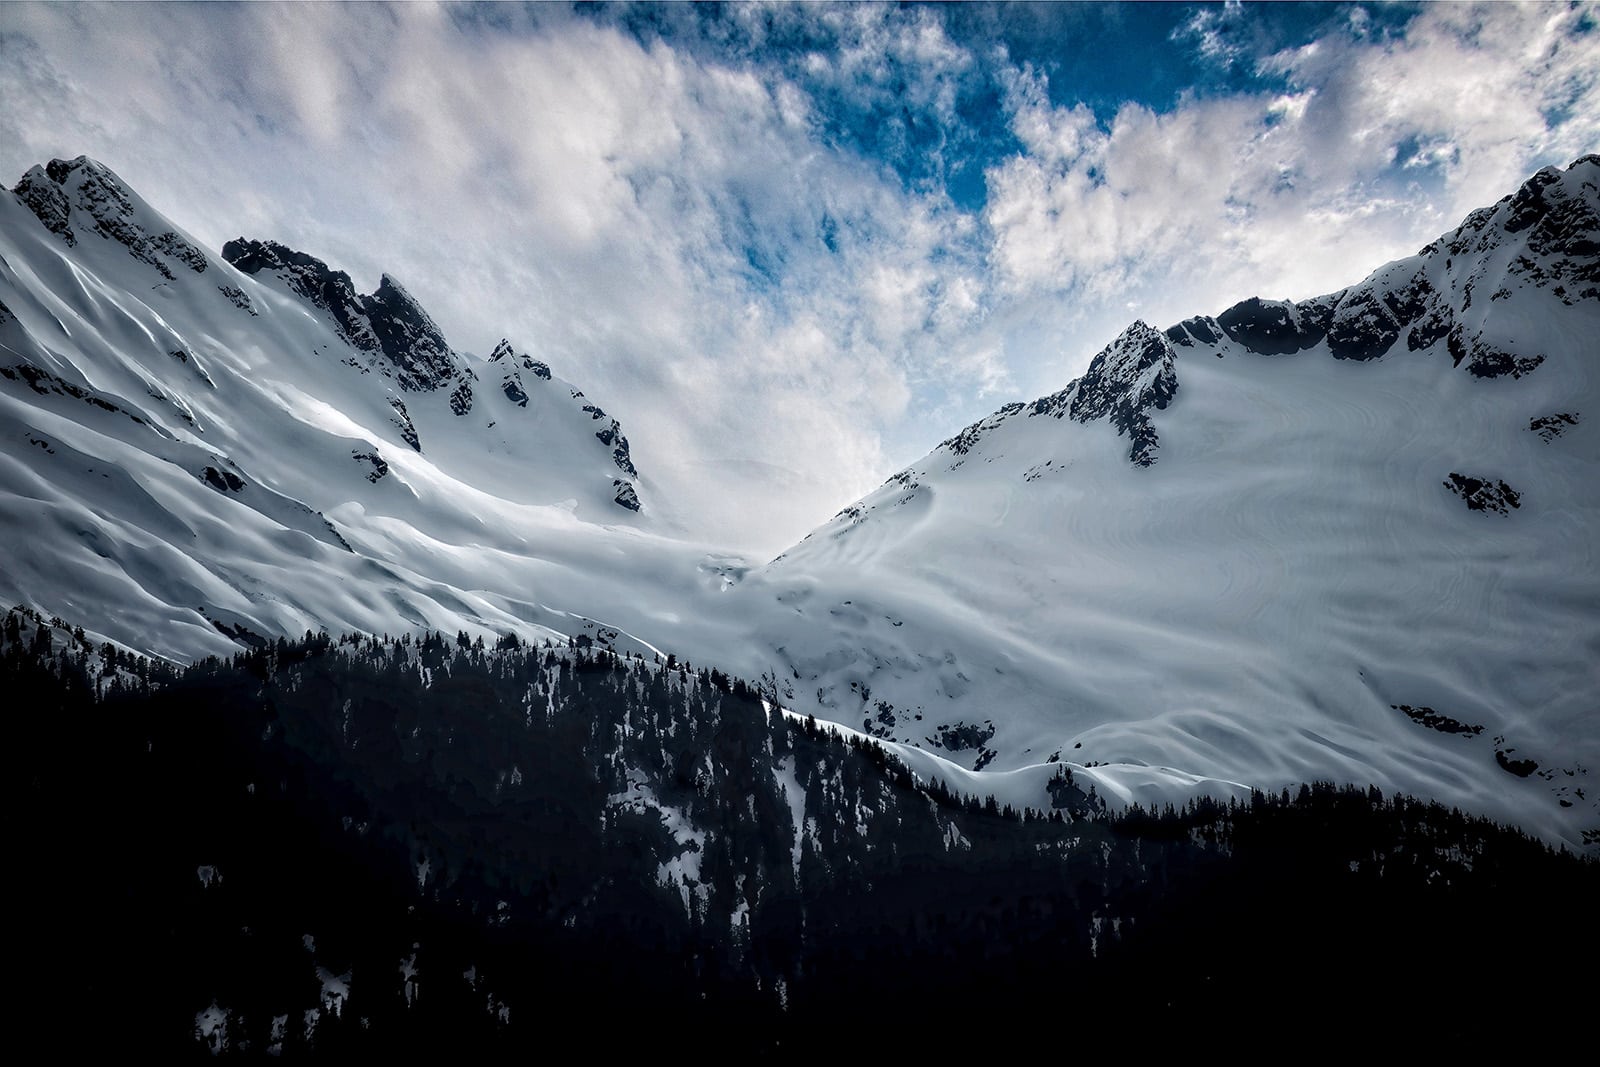 "Snow Peaks" Photograpy by Eric Wiles